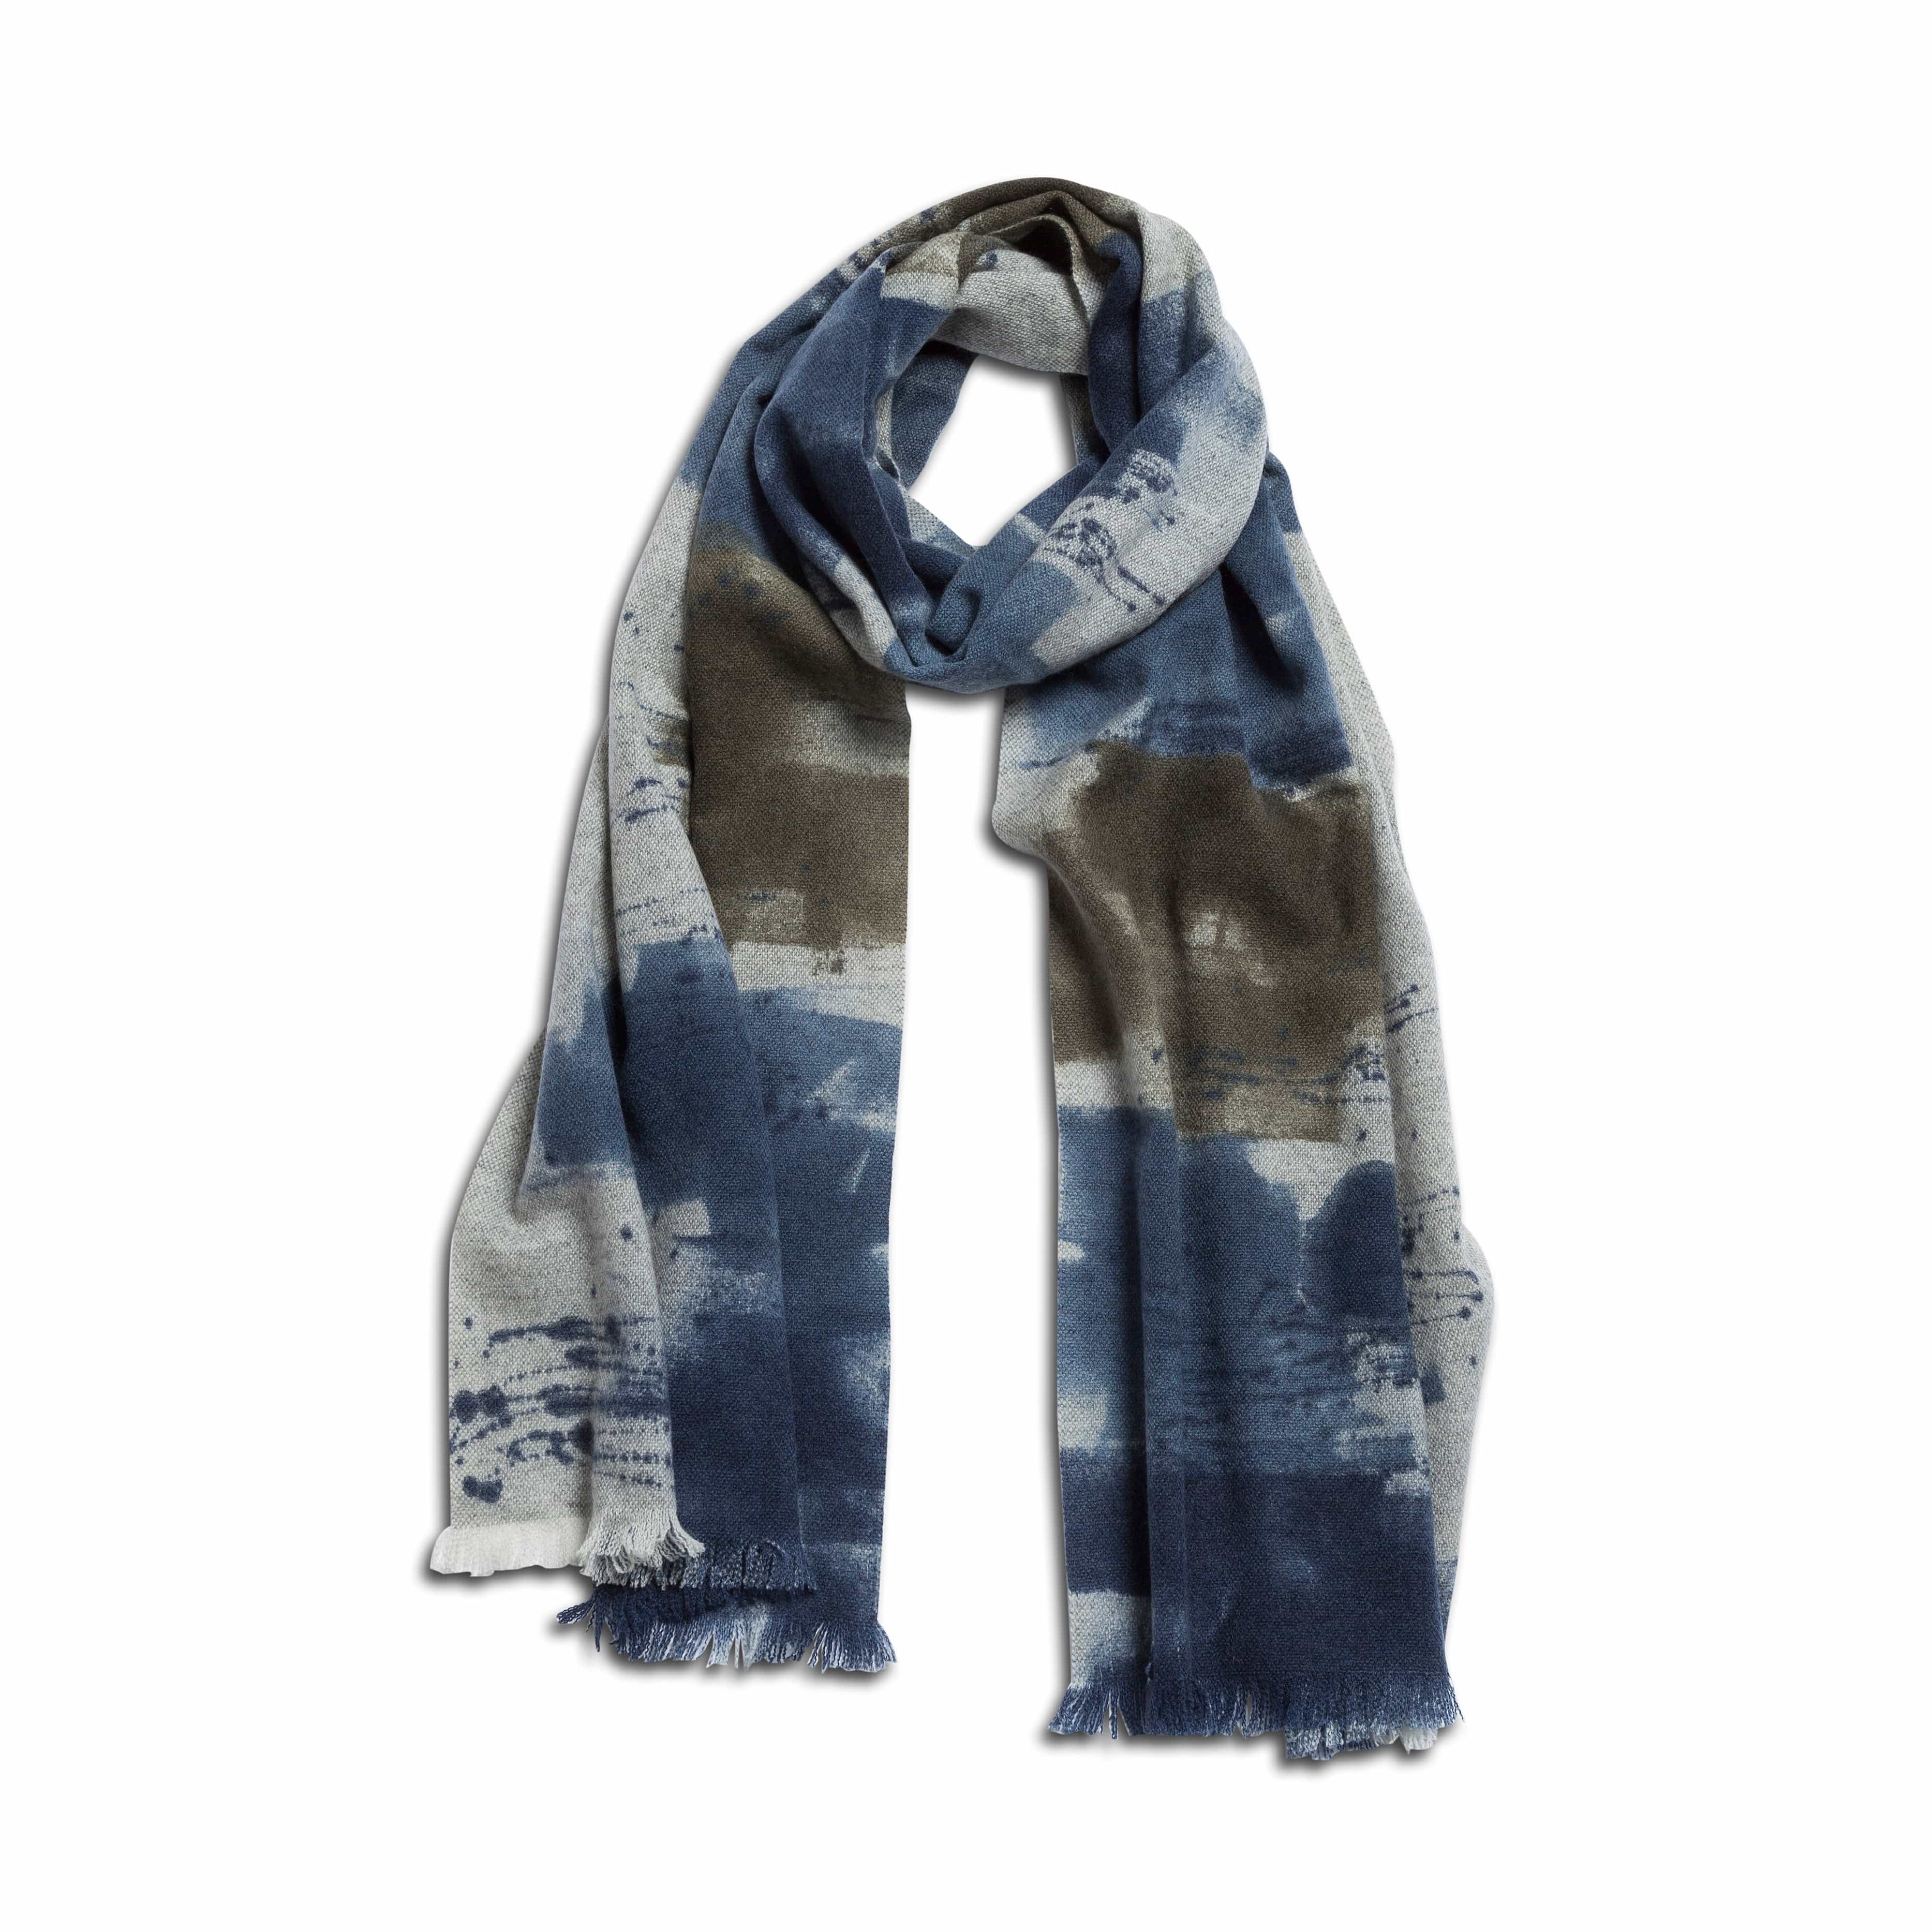 Marco Cashmere Scarf – Handpainted - Grey & Blue - Made in Italy